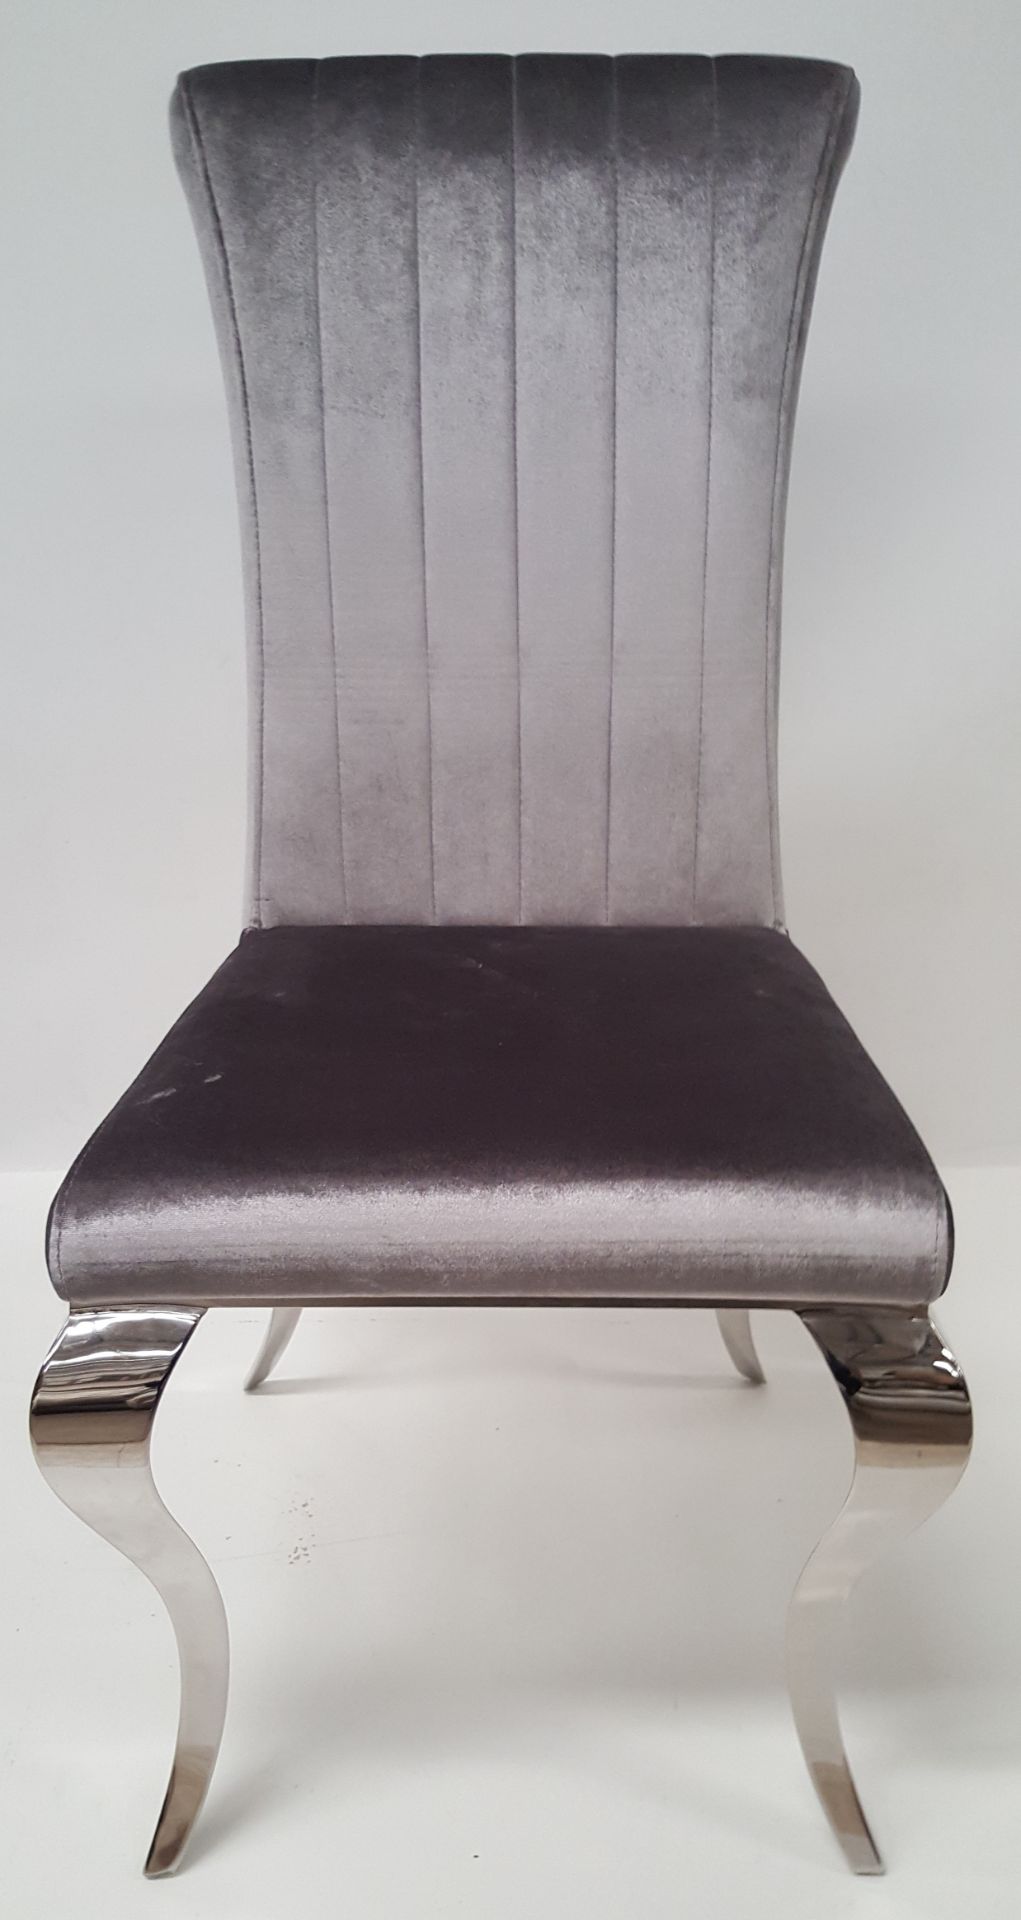 4 x STYLISH SILVER PLUSH VELOUR DRESSING/DINING TABLE CHAIRS - CL408 - Location: Altrincham WA14 - Image 7 of 7